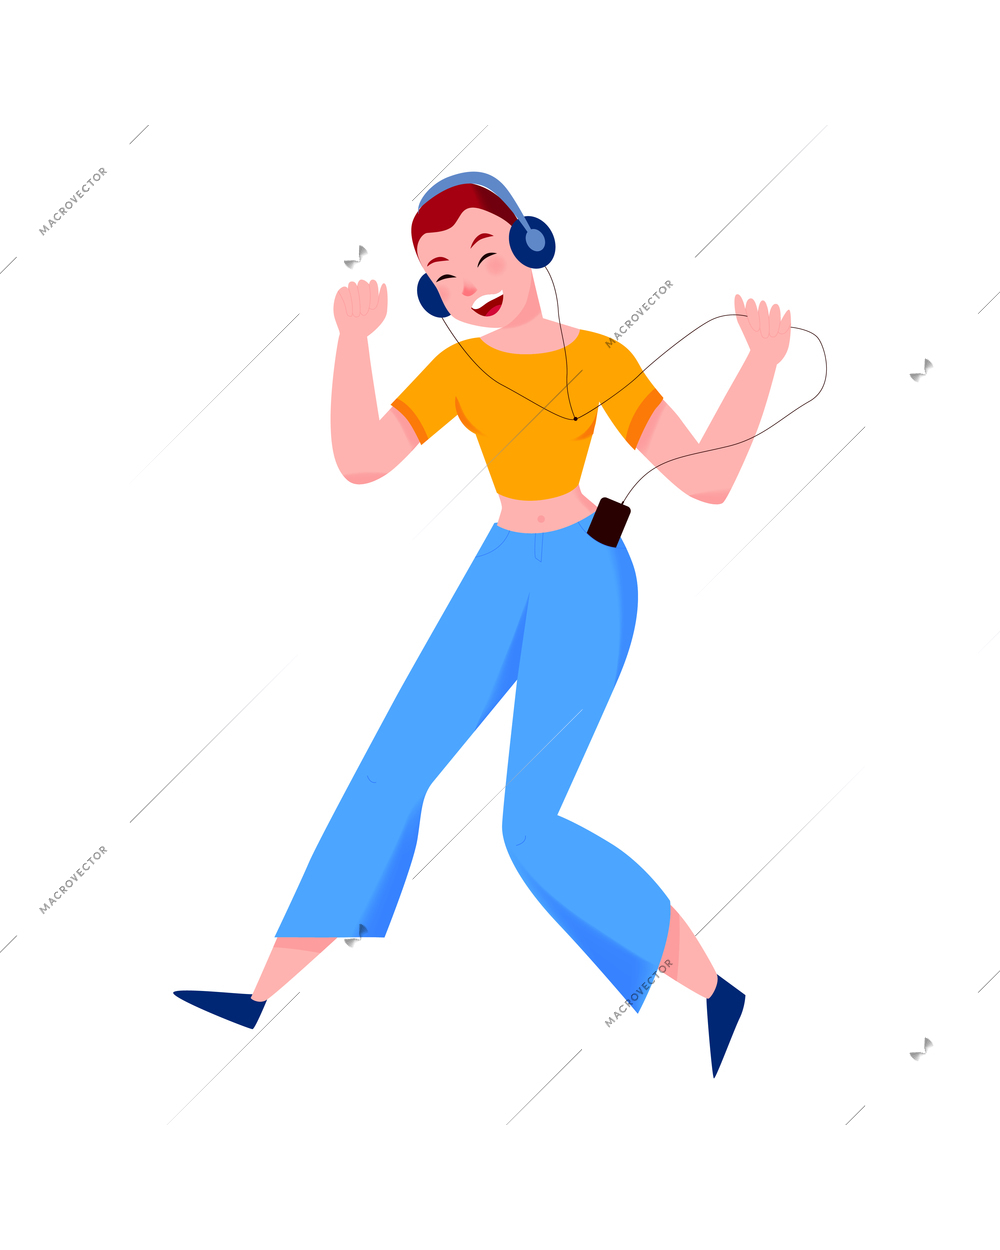 People headphones listen music composition with isolated human character of jumping singing girl in headphone vector illustration